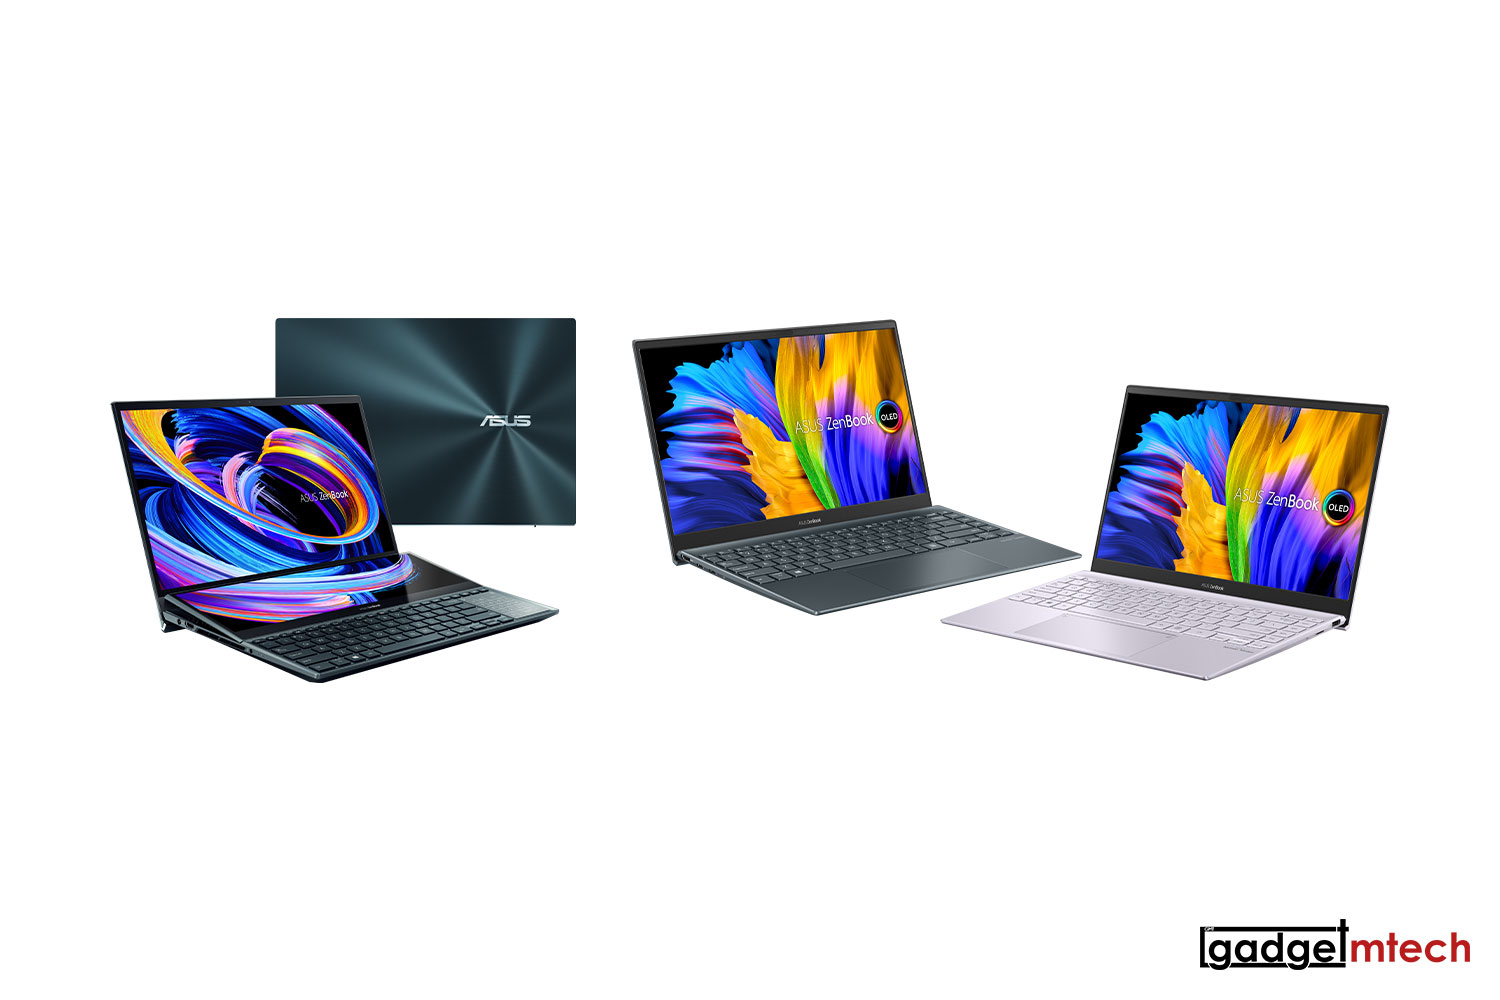 ASUS ZenBook Pro Duo 15 OLED (UX582) and ZenBook 13 OLED (UX325)